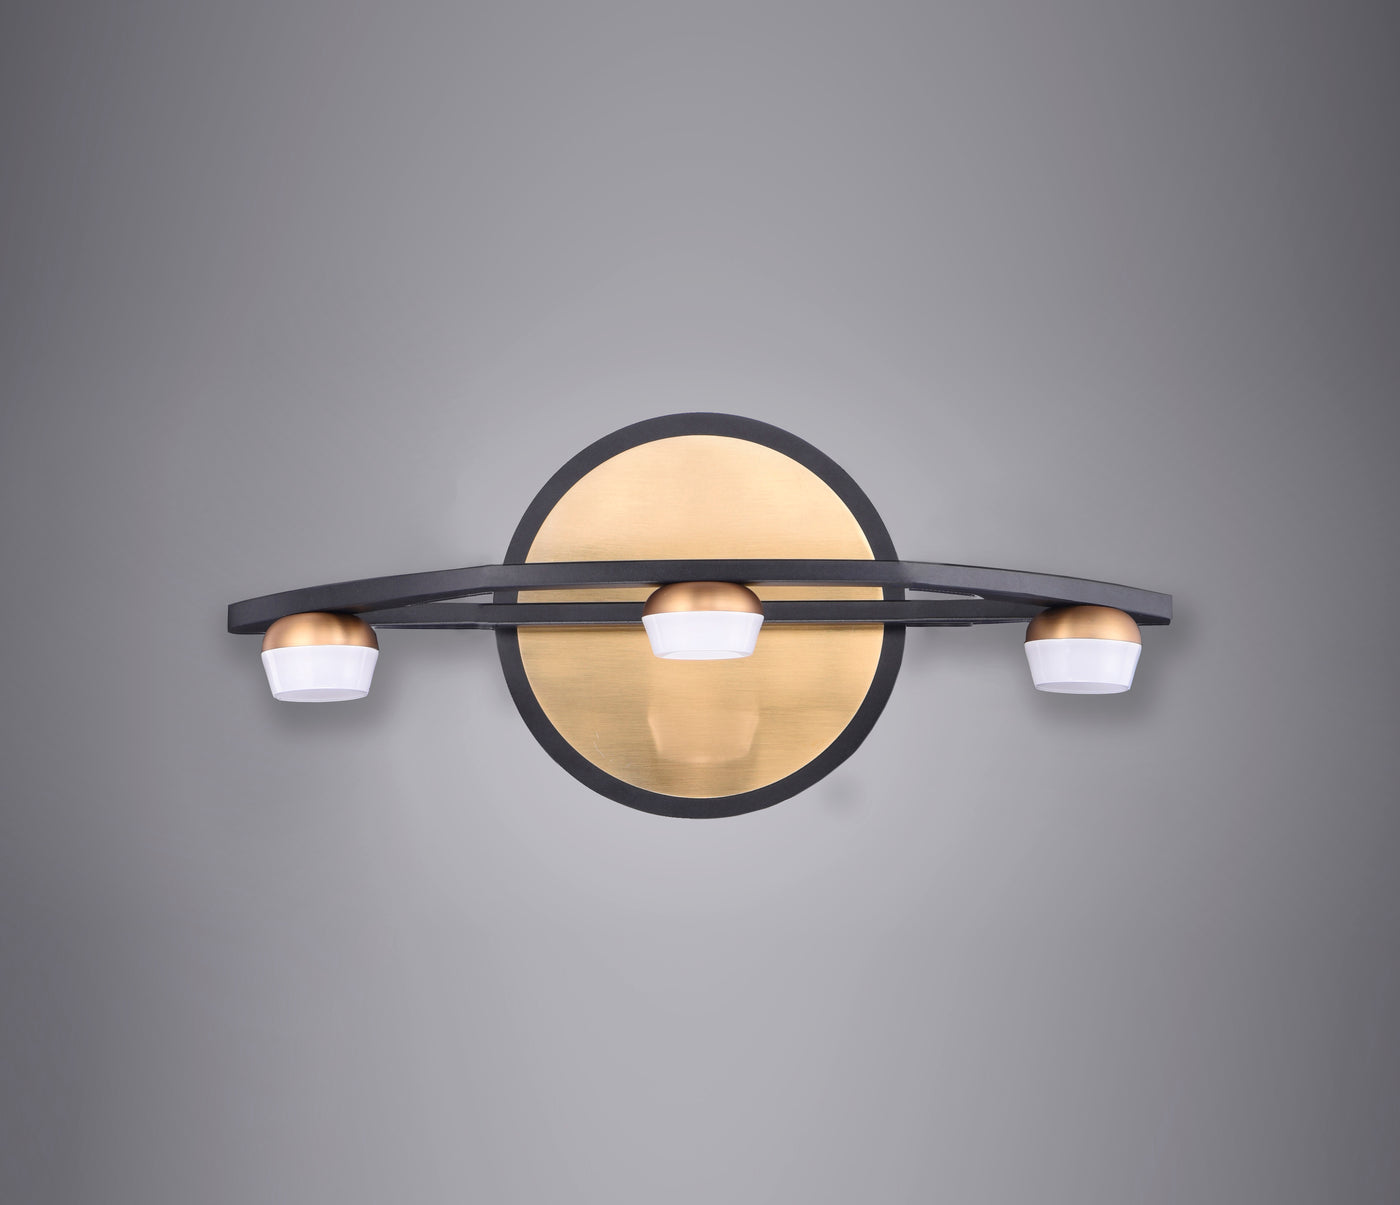  Button 3-Light LED Wall Sconce E23161-75BKGLD Wall Sconce